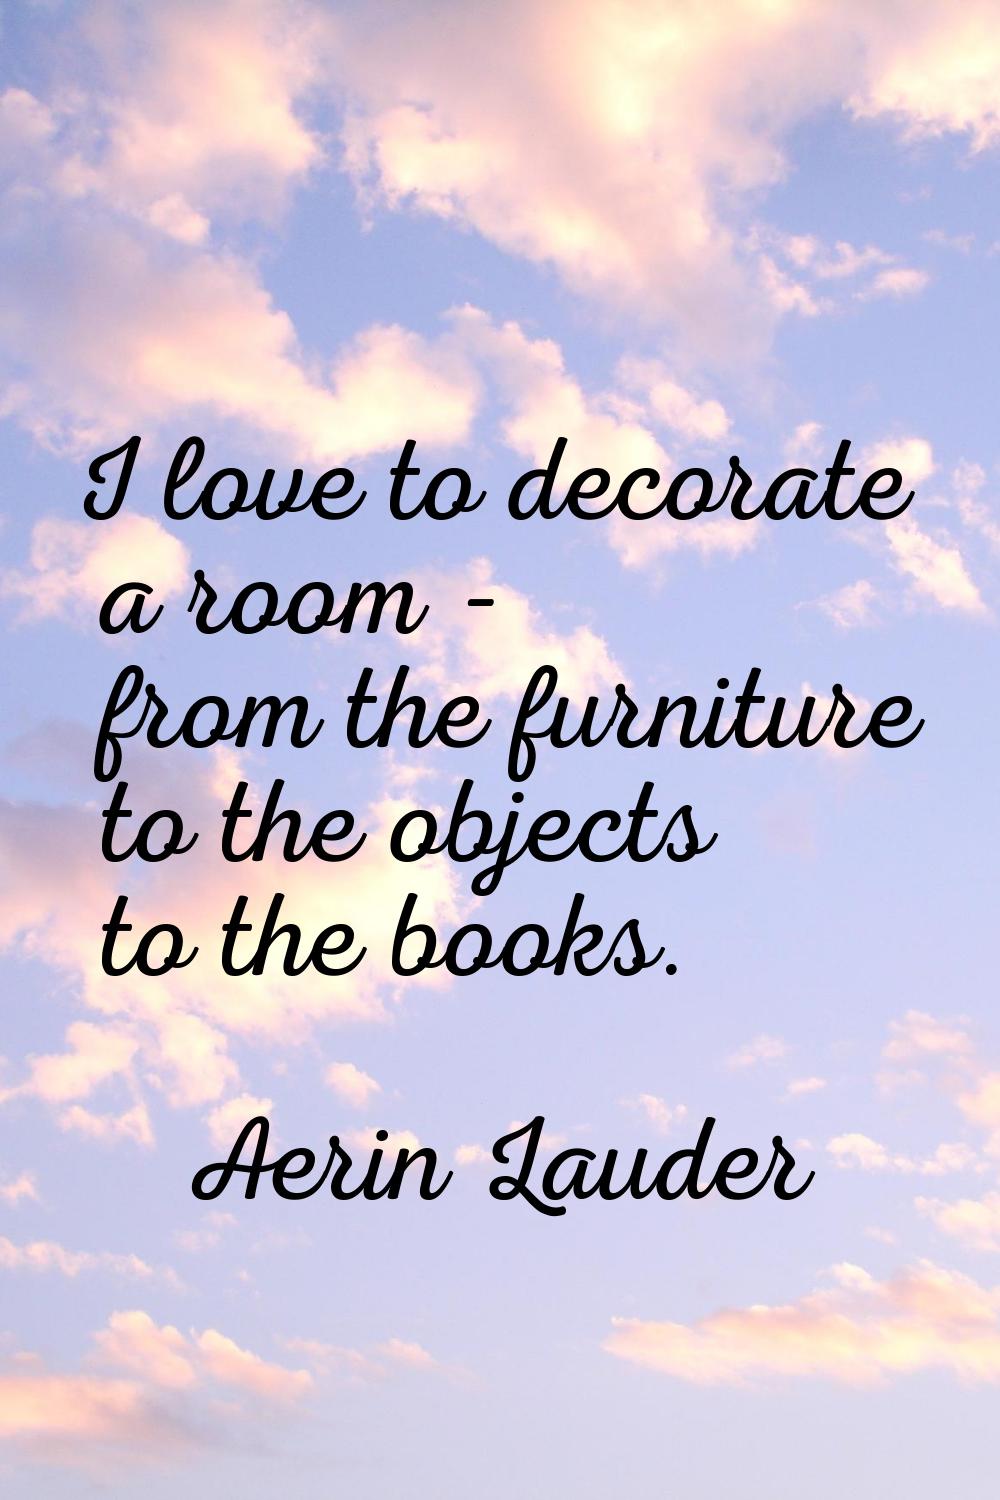 I love to decorate a room - from the furniture to the objects to the books.